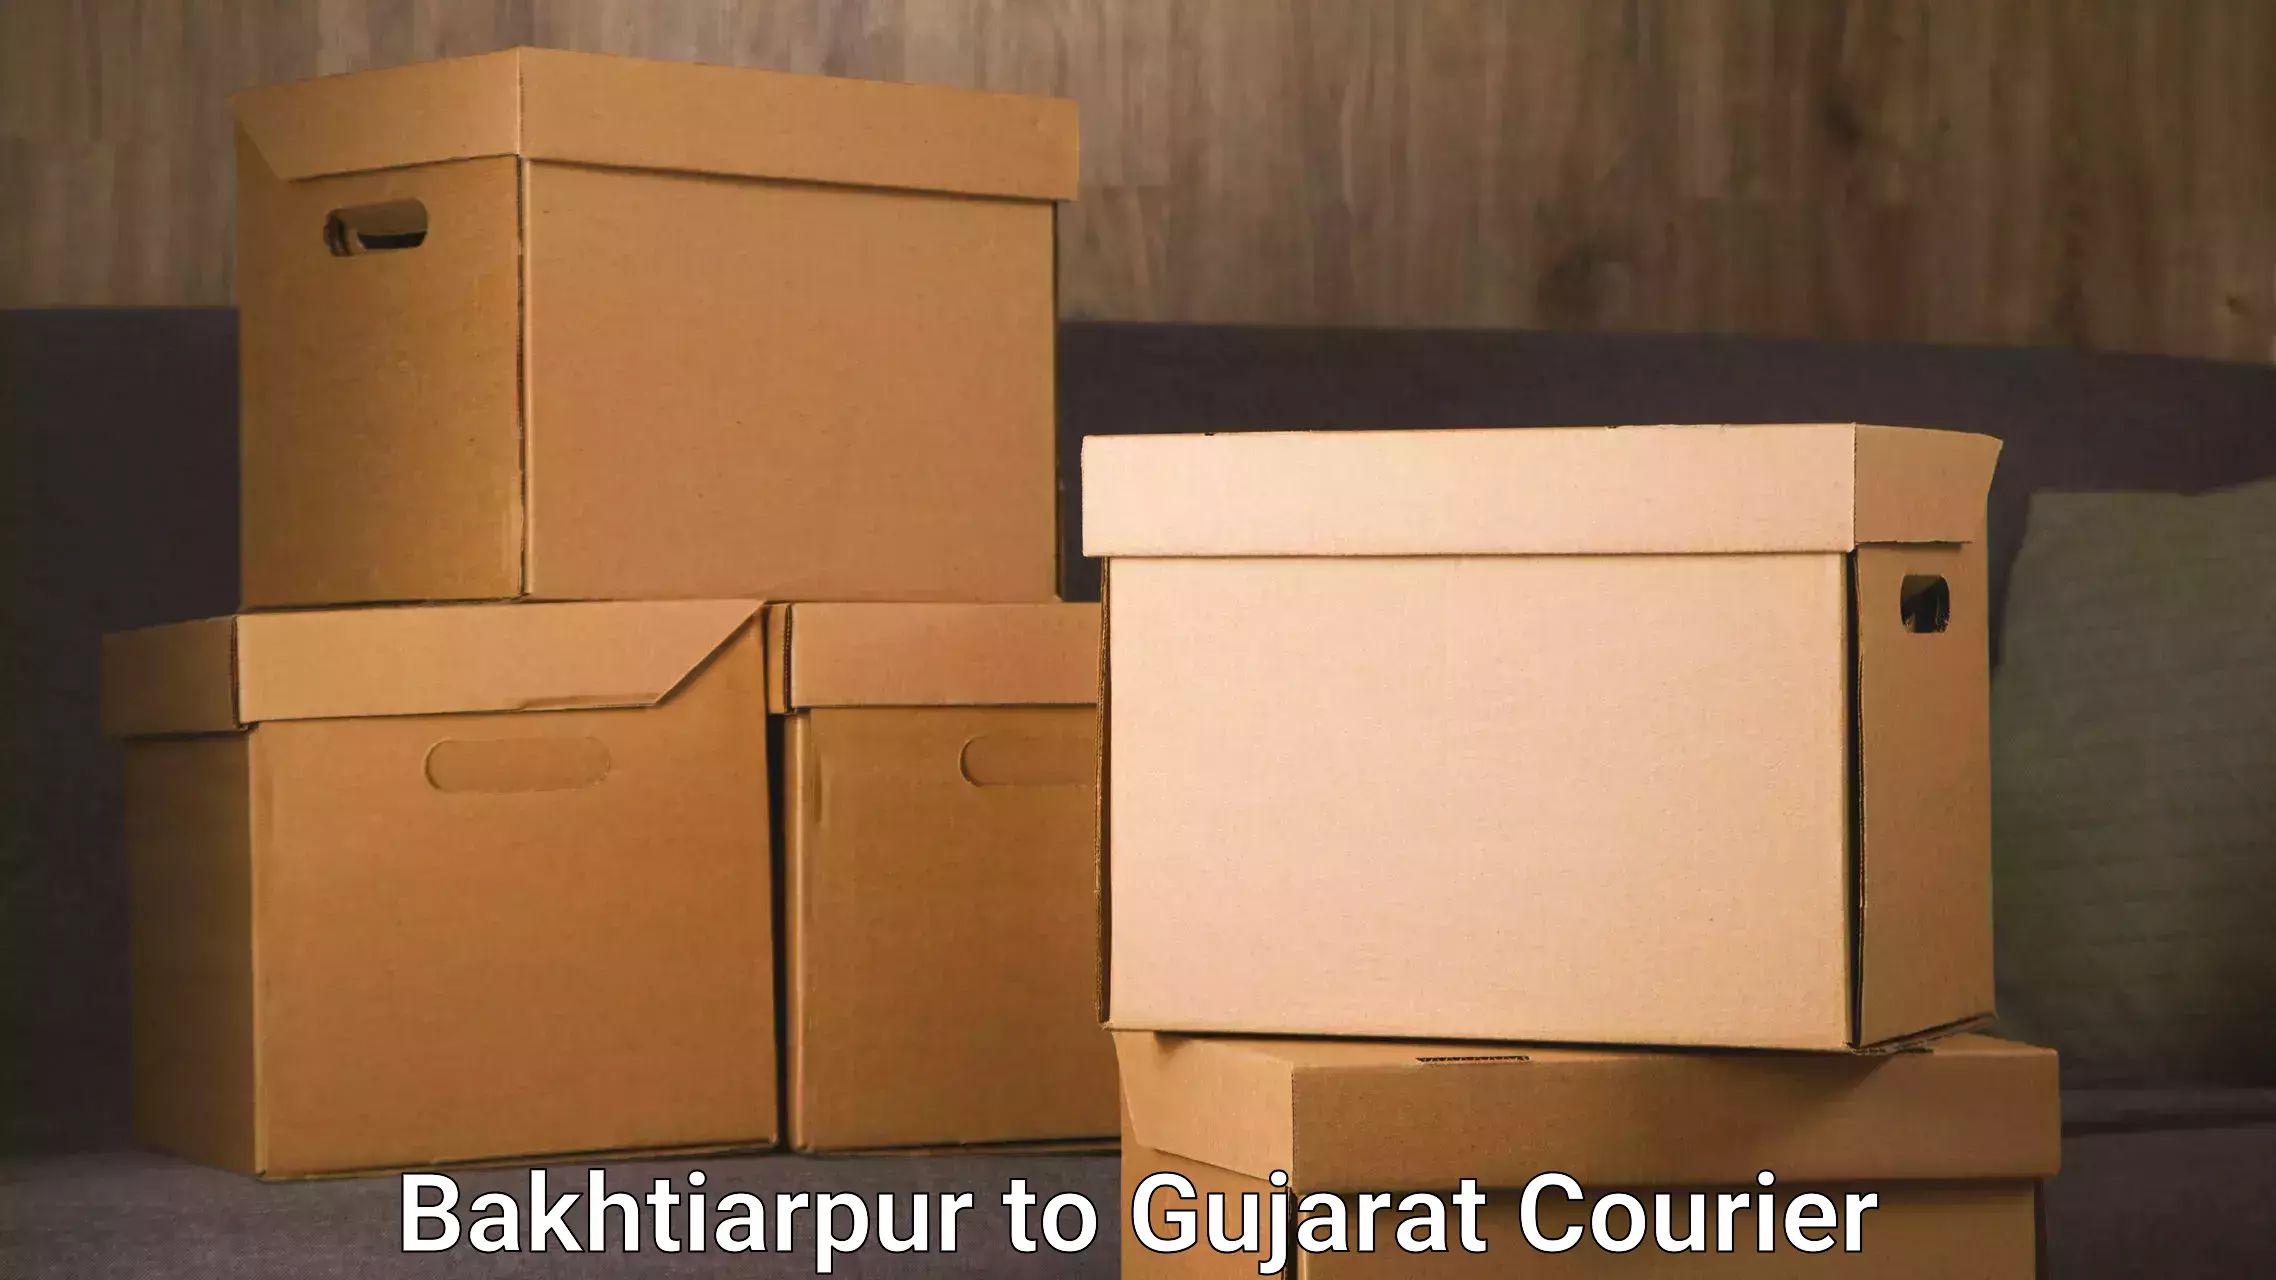 Moving and storage services Bakhtiarpur to Mehsana